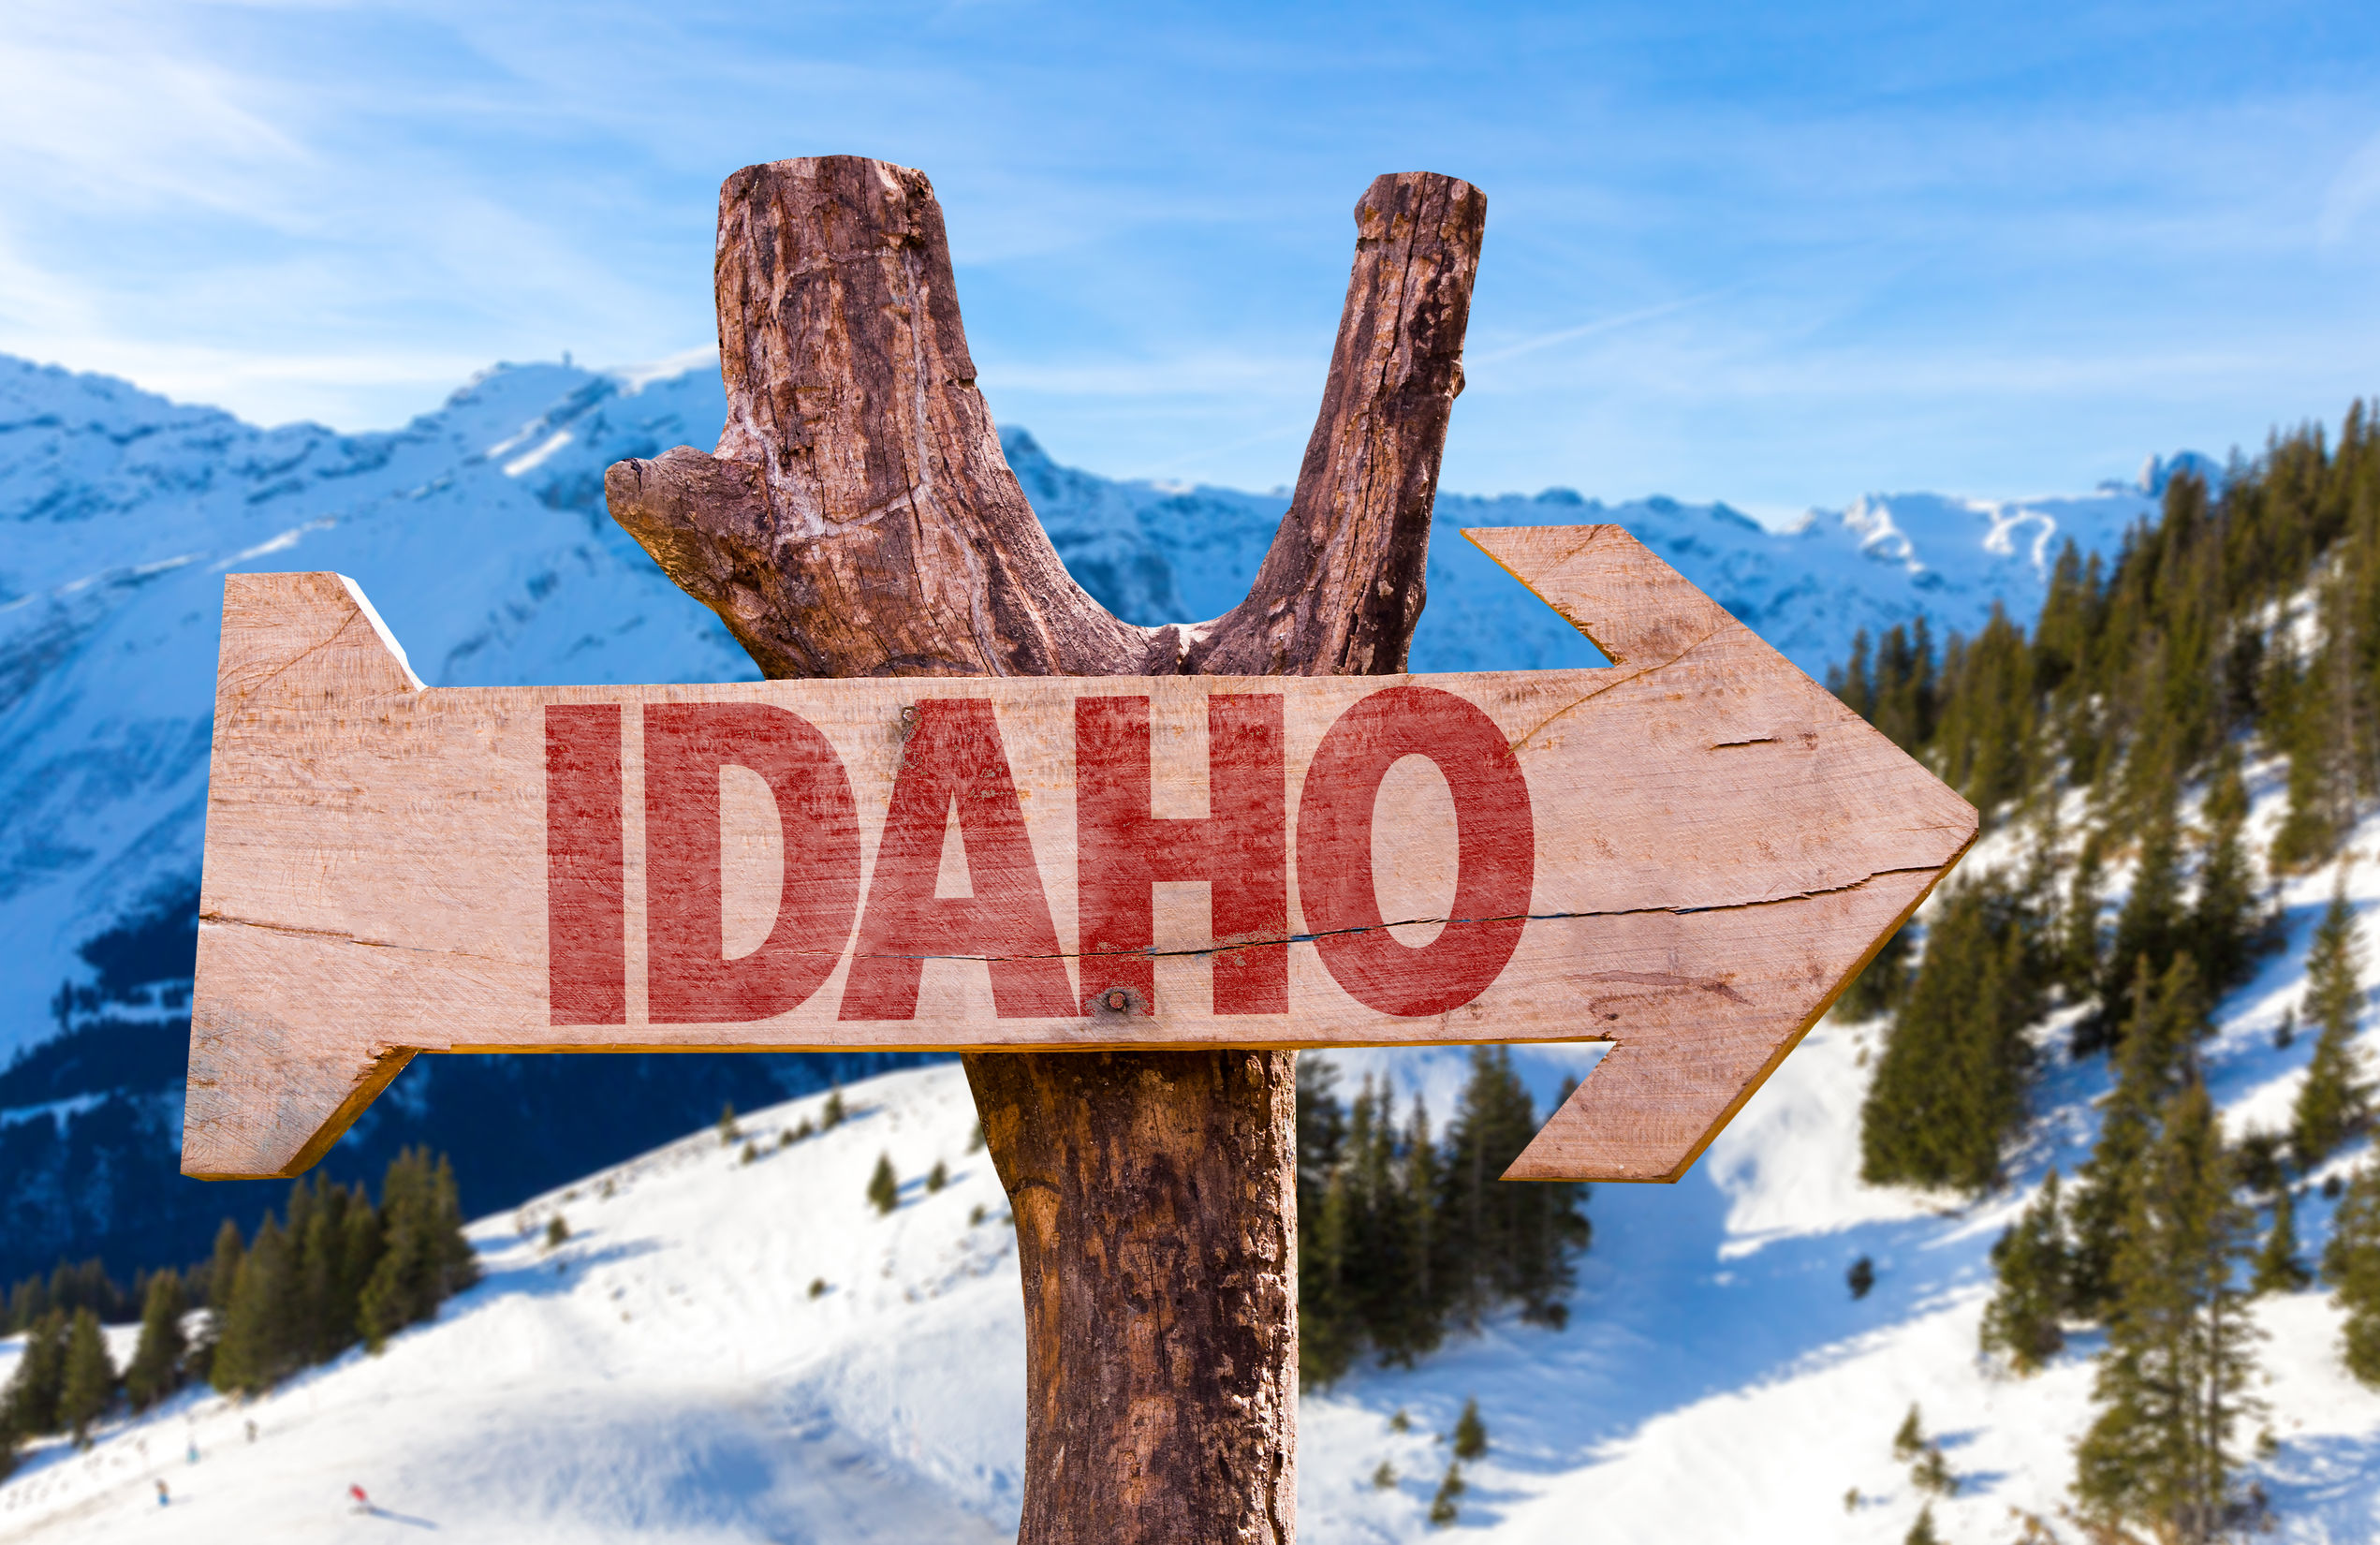 idaho wooden sign with winter background